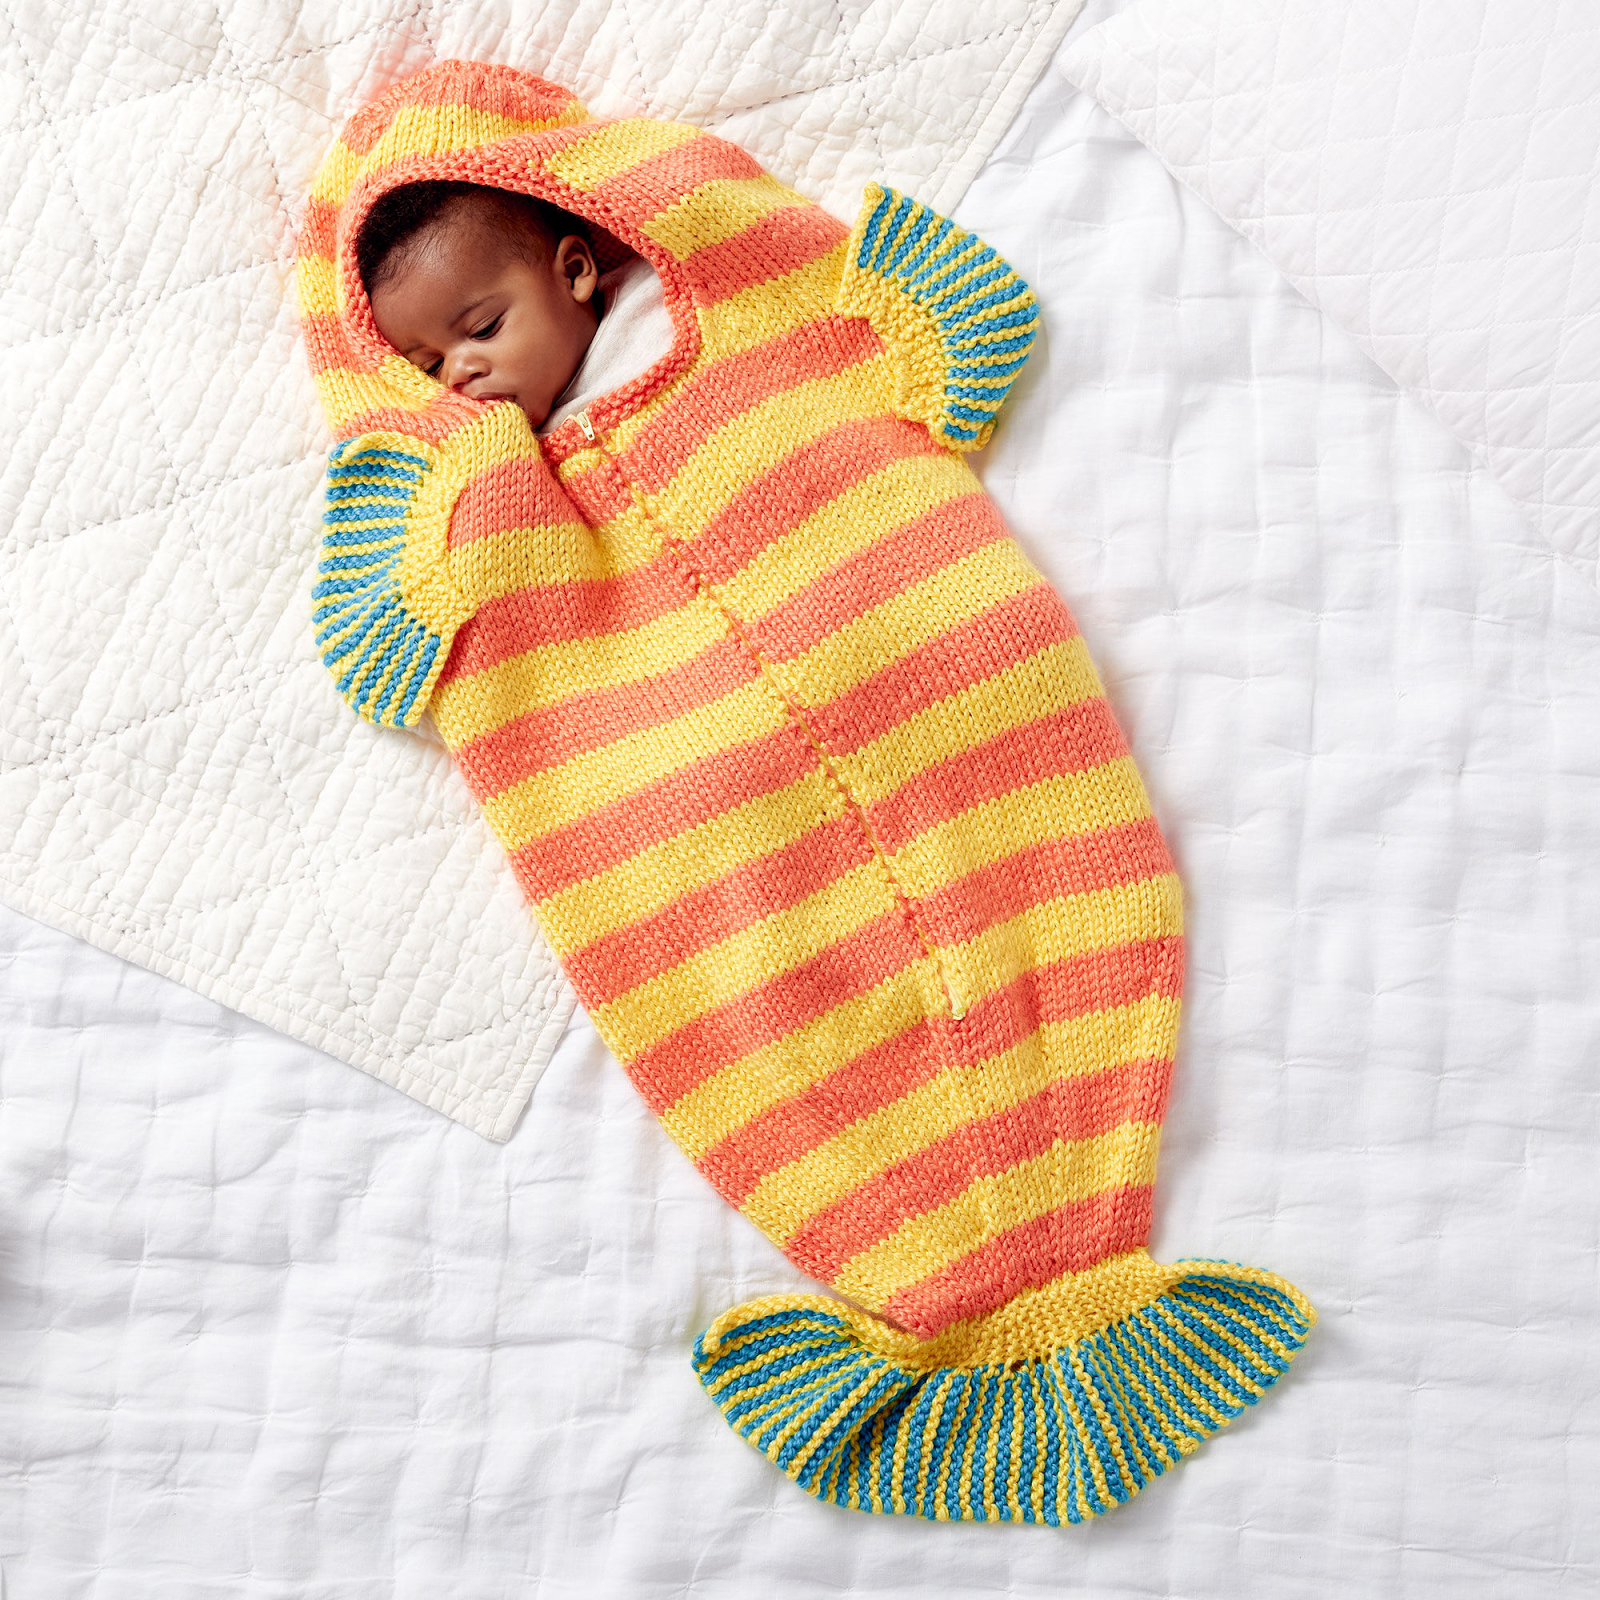 baby sleeping in a sleep sack that has stripes and fins